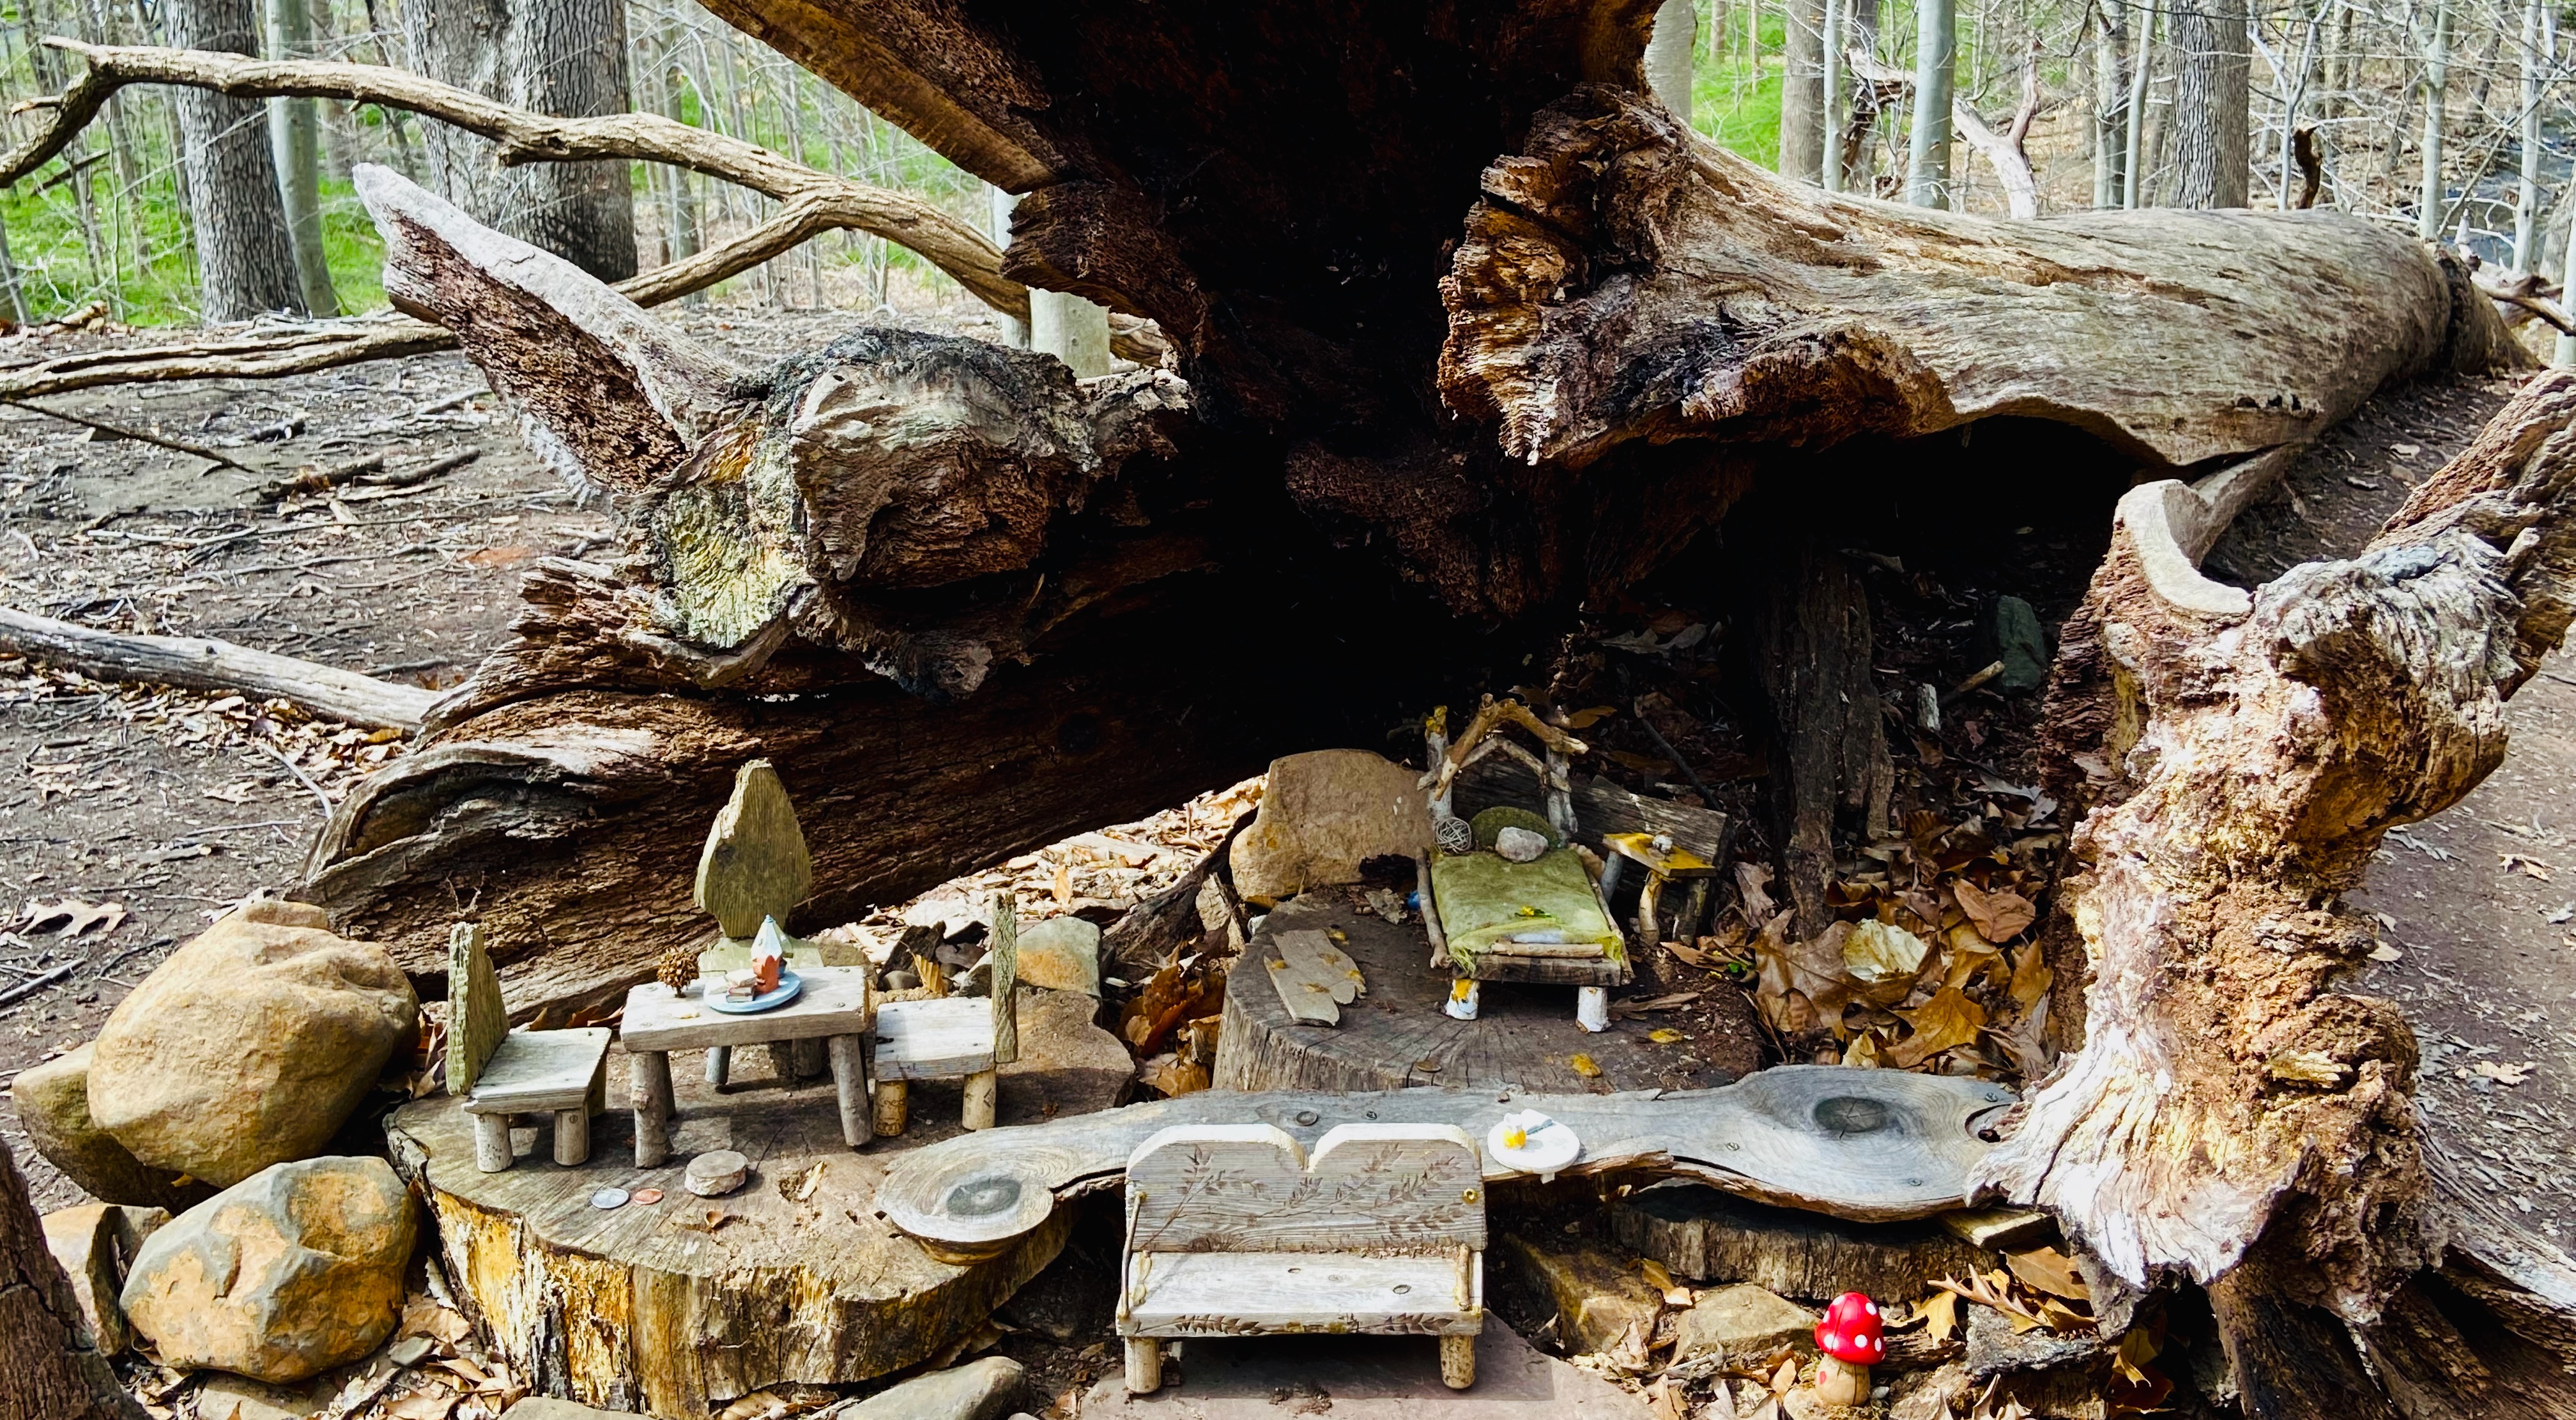 she made a fairy trail for her autistic son; now it’s a public destination